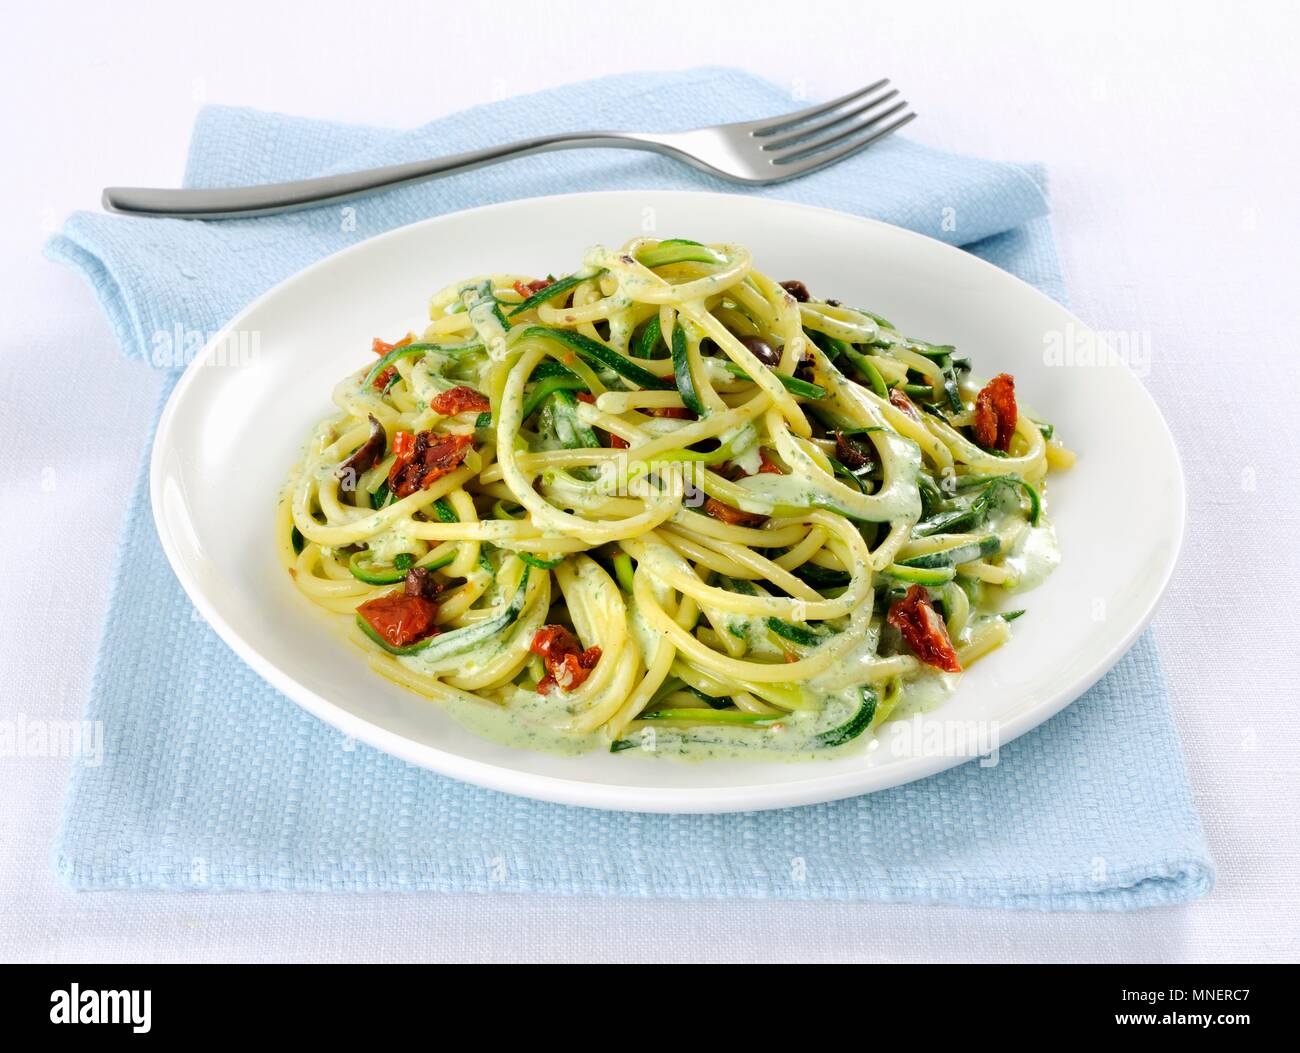 Spaghetti with courgette and olives Stock Photo